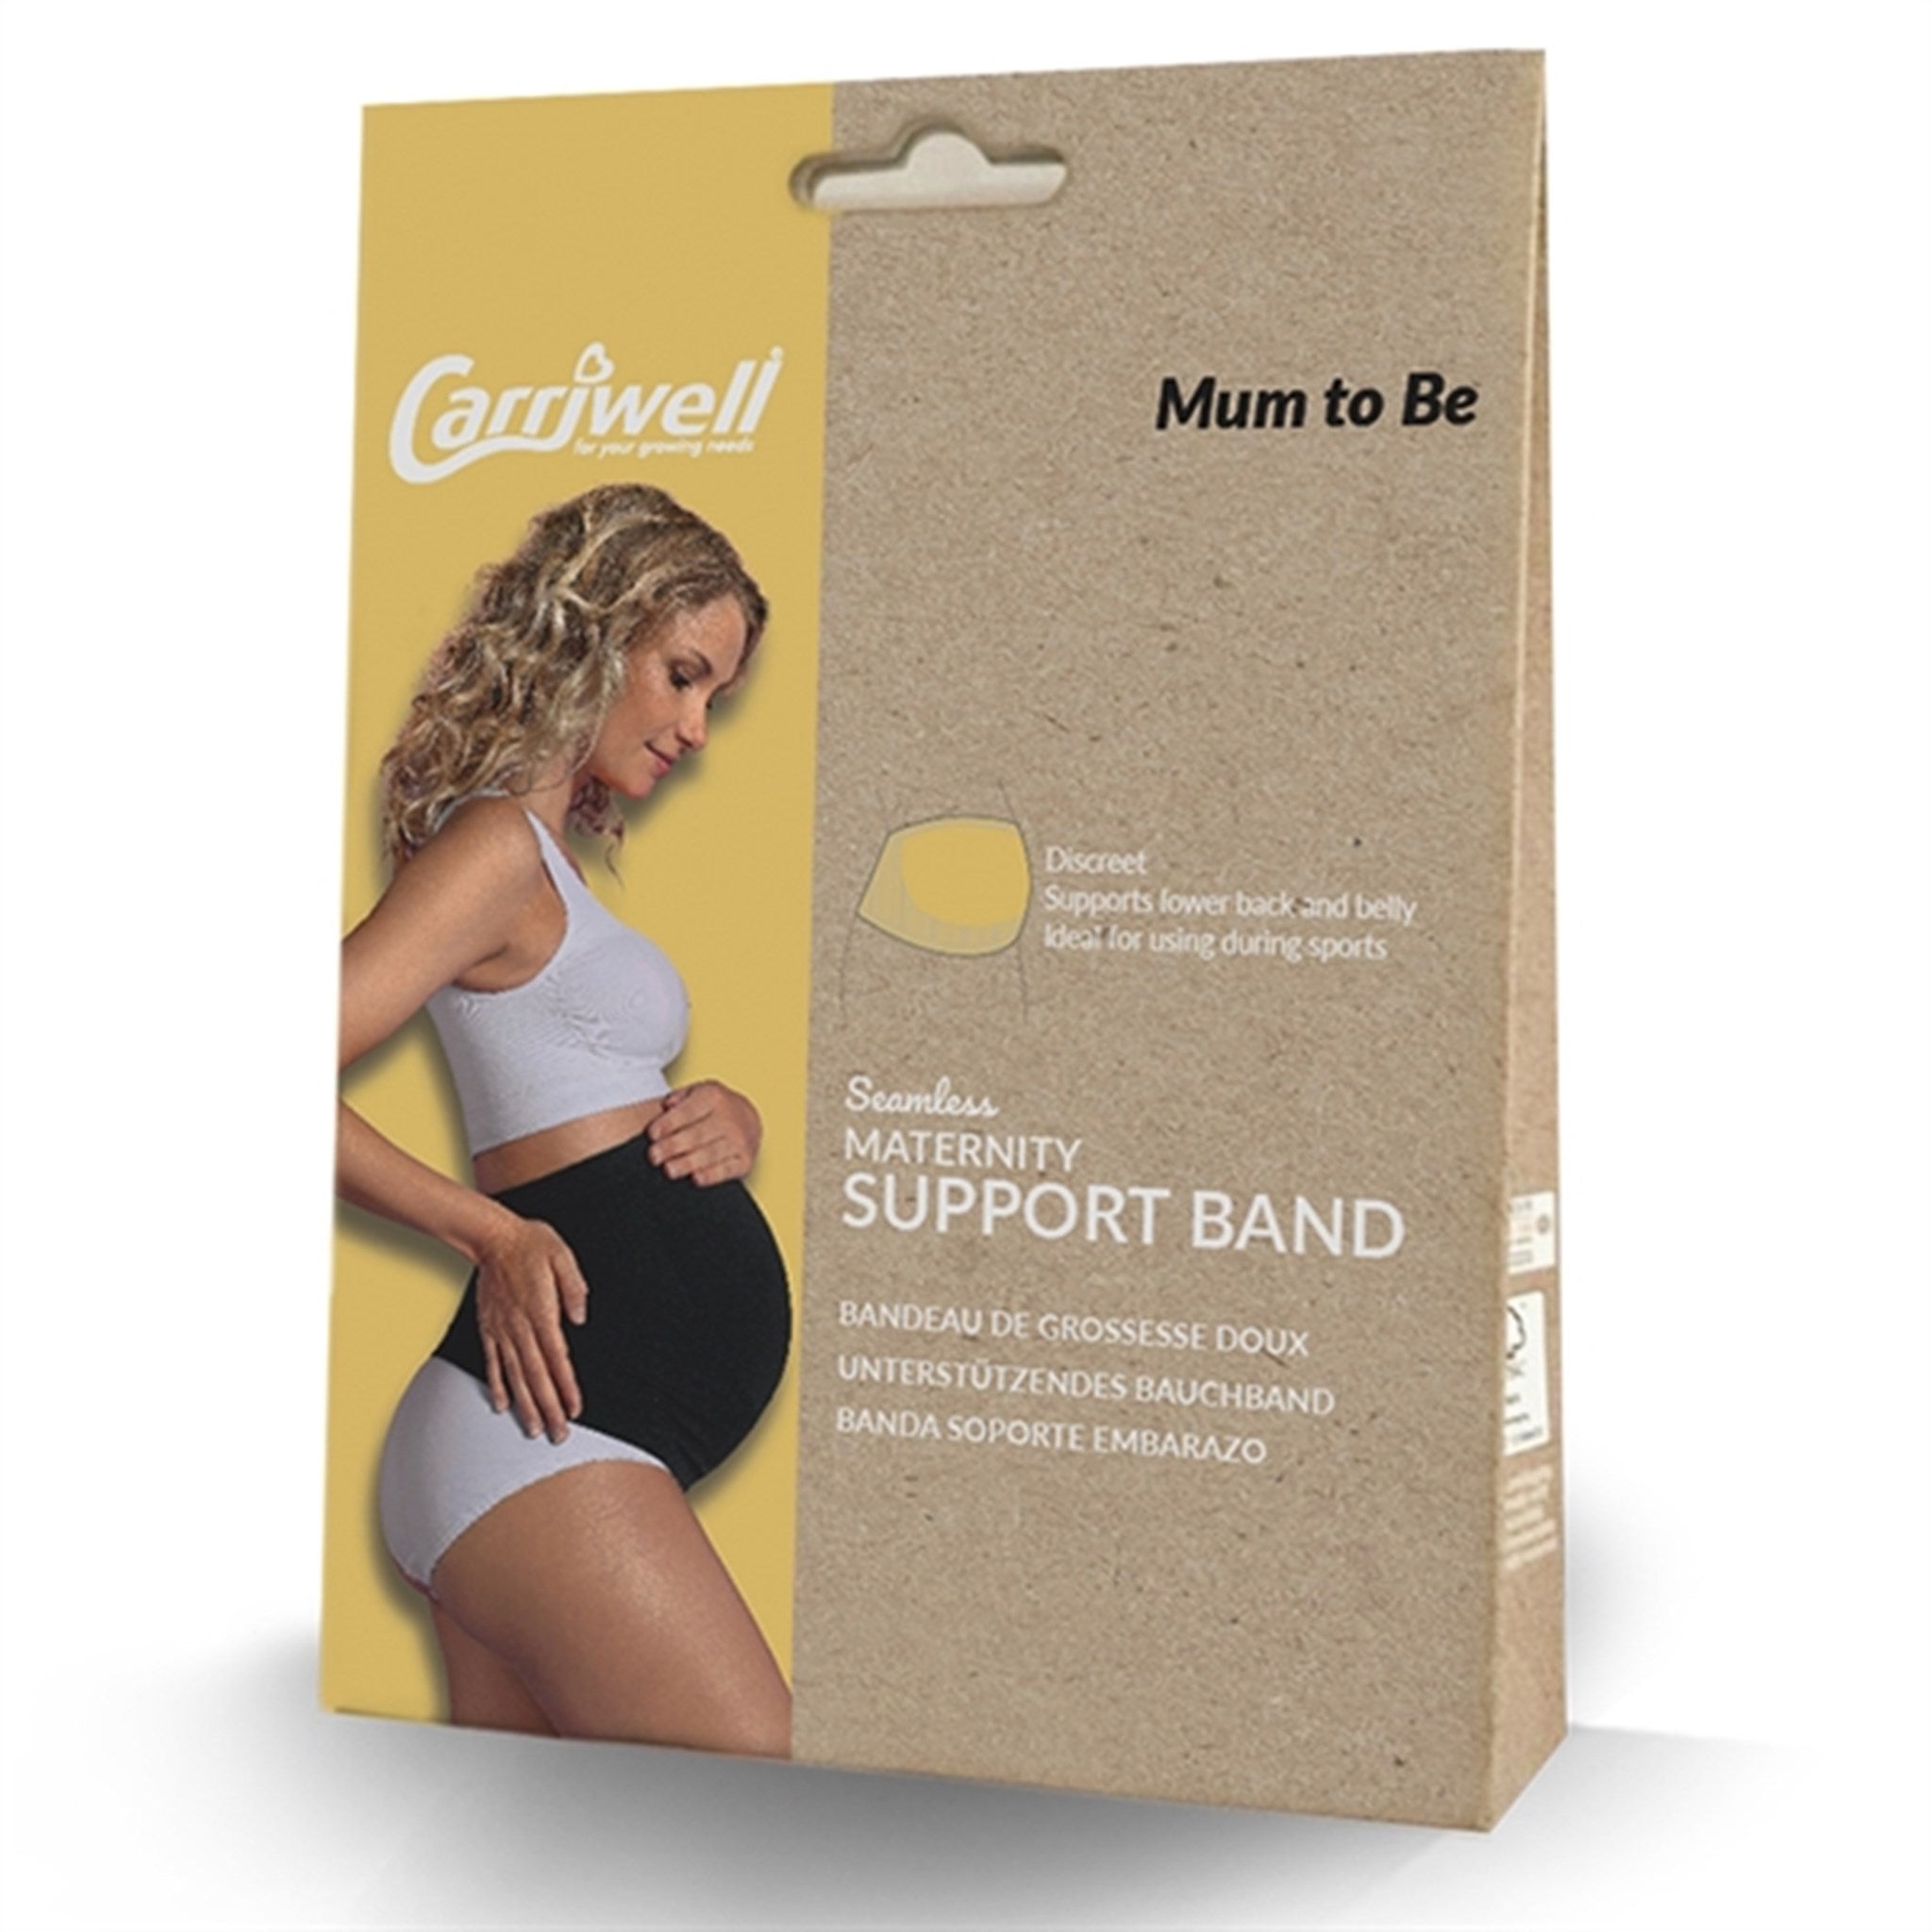 Carriwell Maternity Support Band White 7